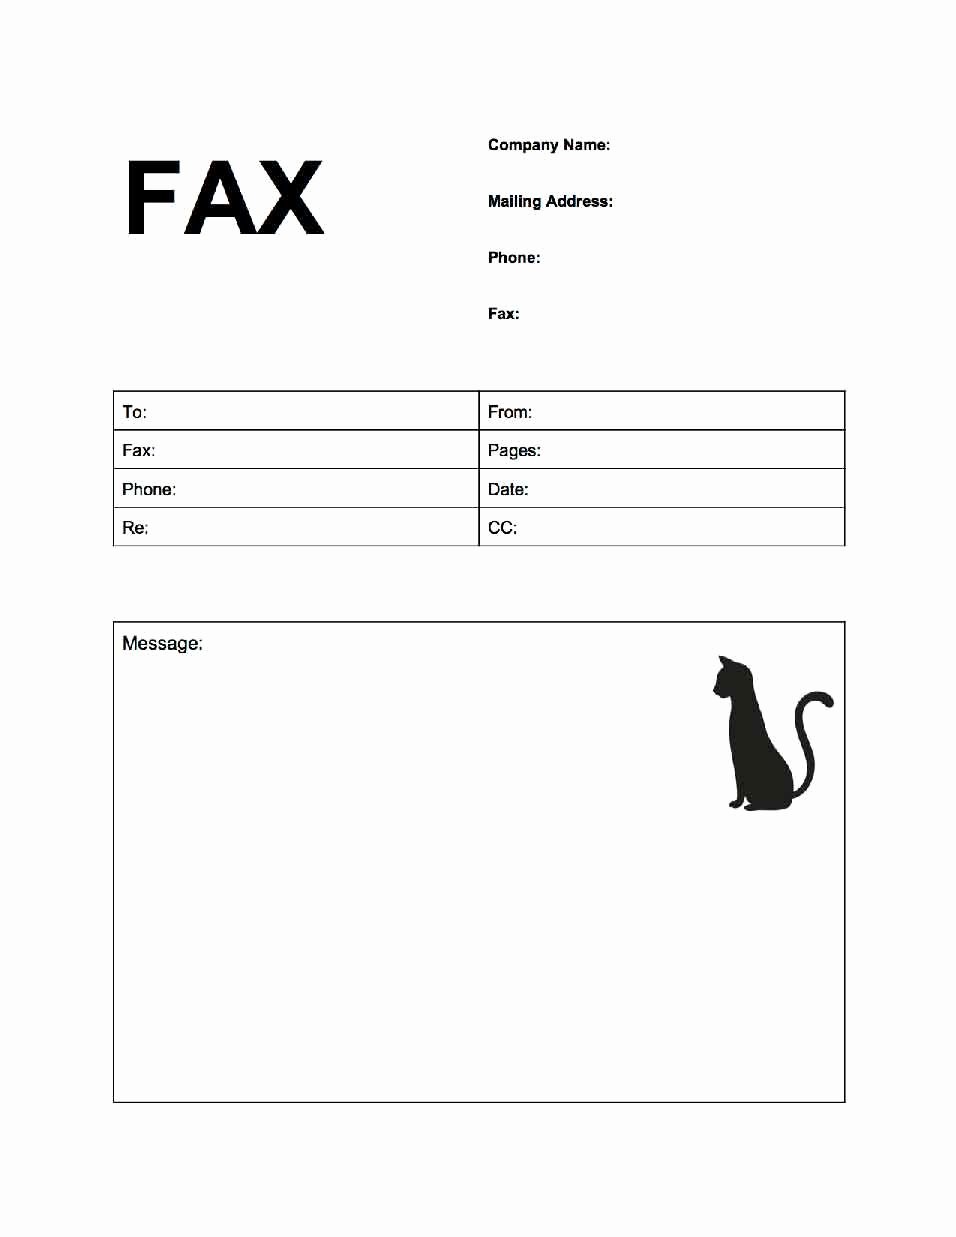 Fax Cover Sheet Template Free Best Of Cute Fax Cover Sheet Popular Fax Cover Sheets